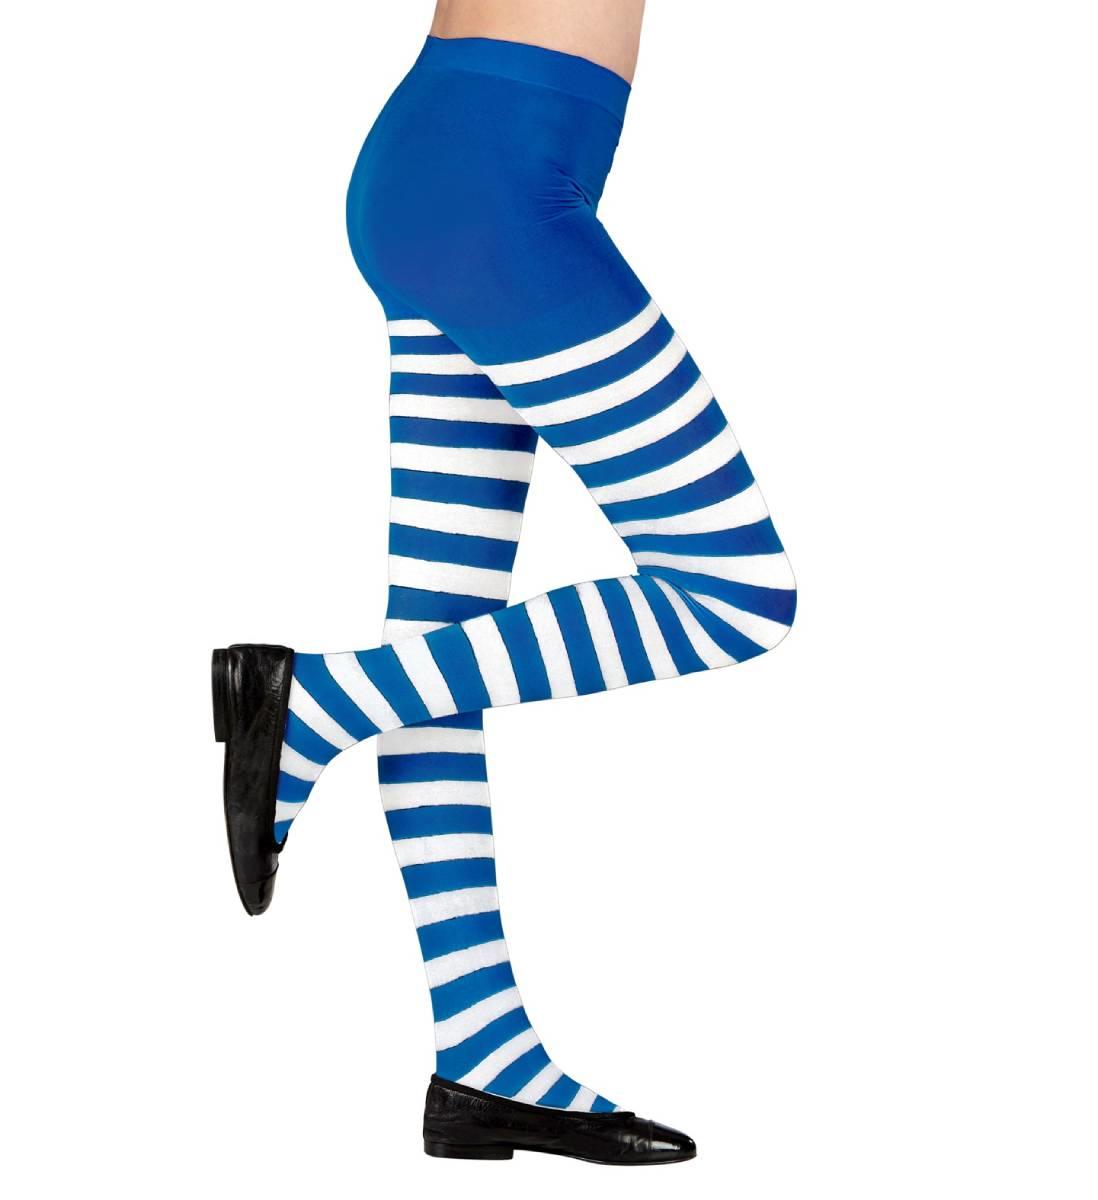 Girl's blue and white stripped pantyhose tights by Widmann 01236, 01237 and 01238 available here at Karnival Costumes online party shop